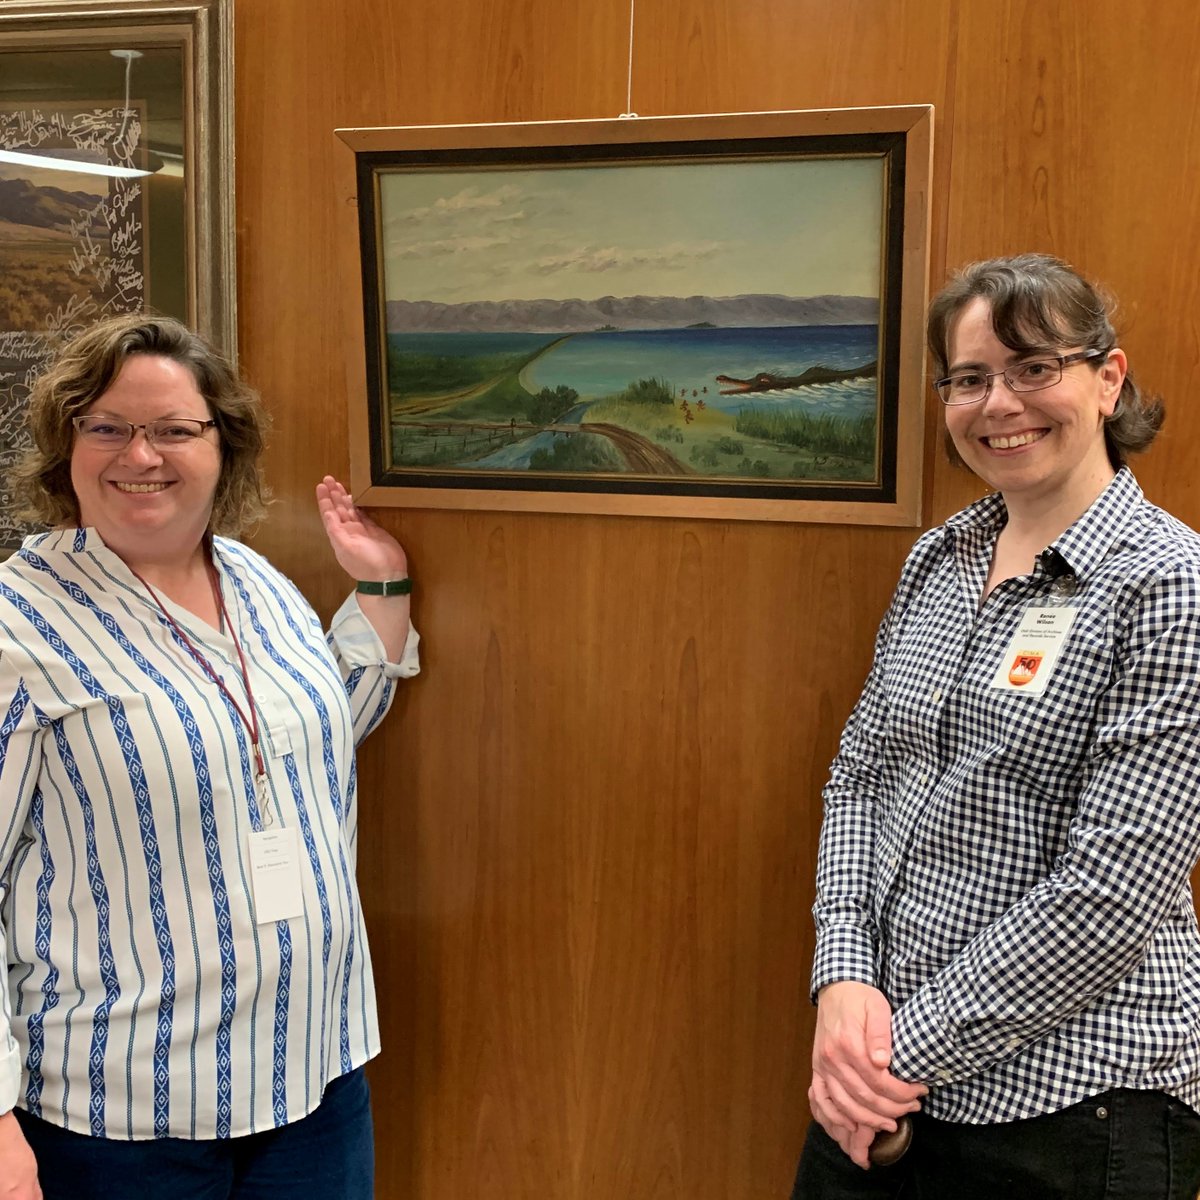 Of course if we're going to mention Bear Lake for #ArchivesUnderTheSea, we have to spotlight the monster! The local legend is captured in a painting at @USULibraries. When our staff was at @USUAggies for the @cimarchivists conference they snapped a photo! 🦕#ArchivesHashtagParty